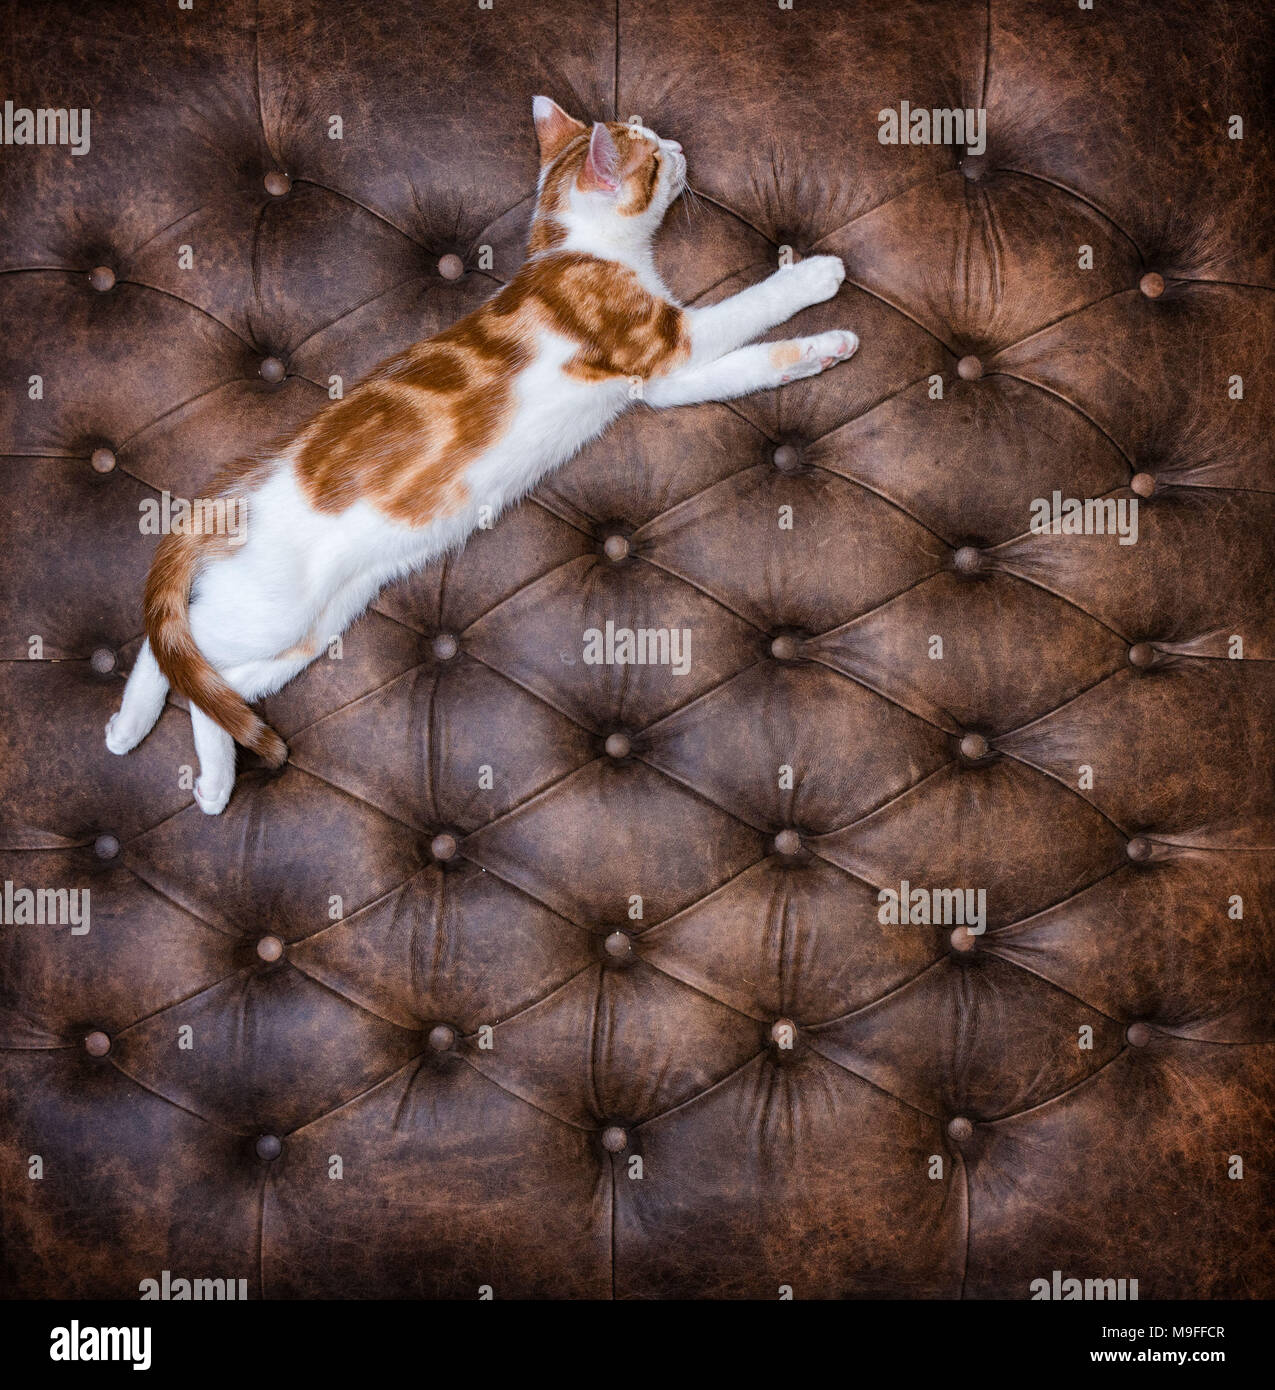 Looking down at cute red kitten sleeping on a luxurious buttoned leather ottoman Stock Photo